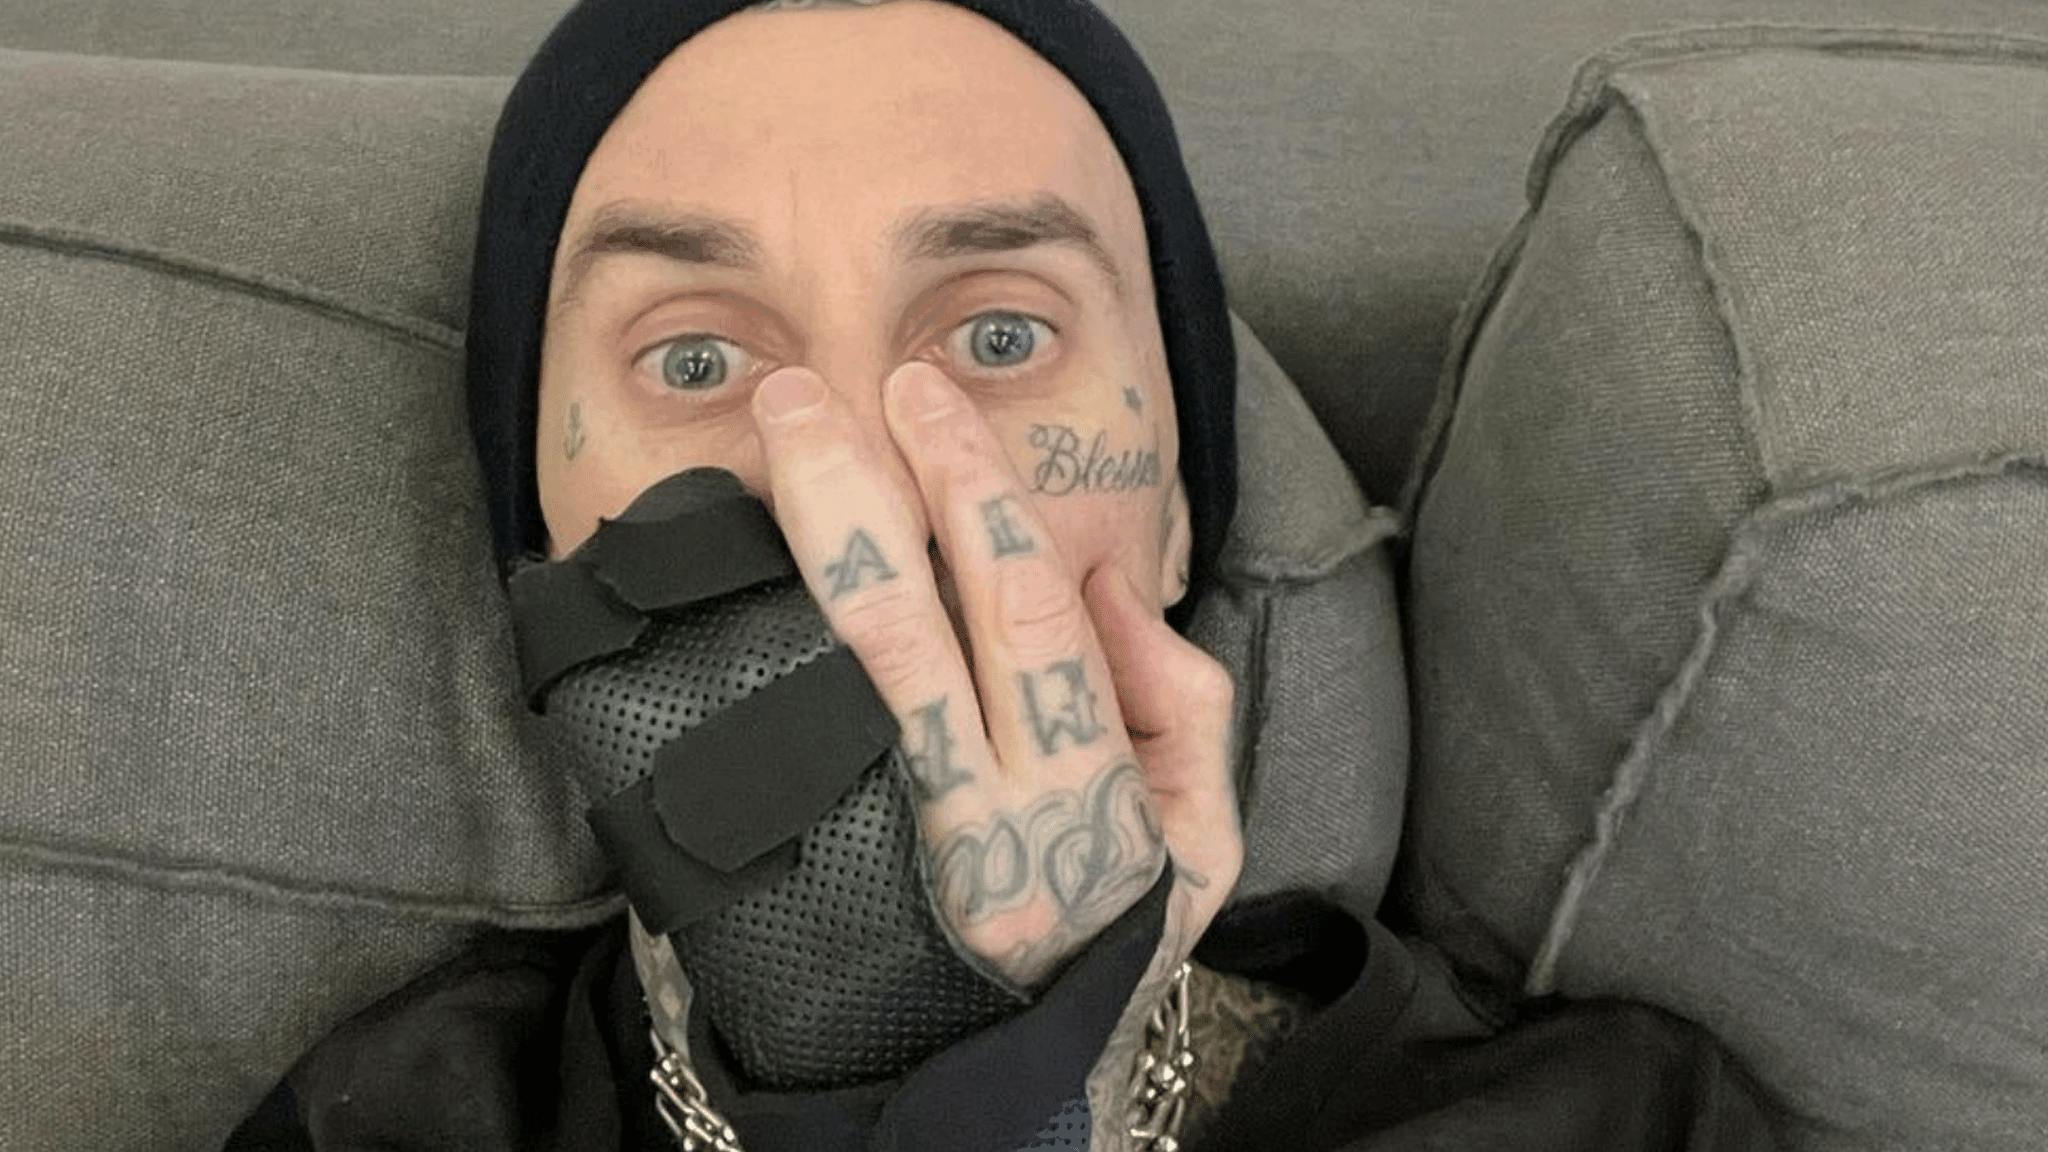 Travis Barker getting surgery on injured finger ahead of blink-182 tour